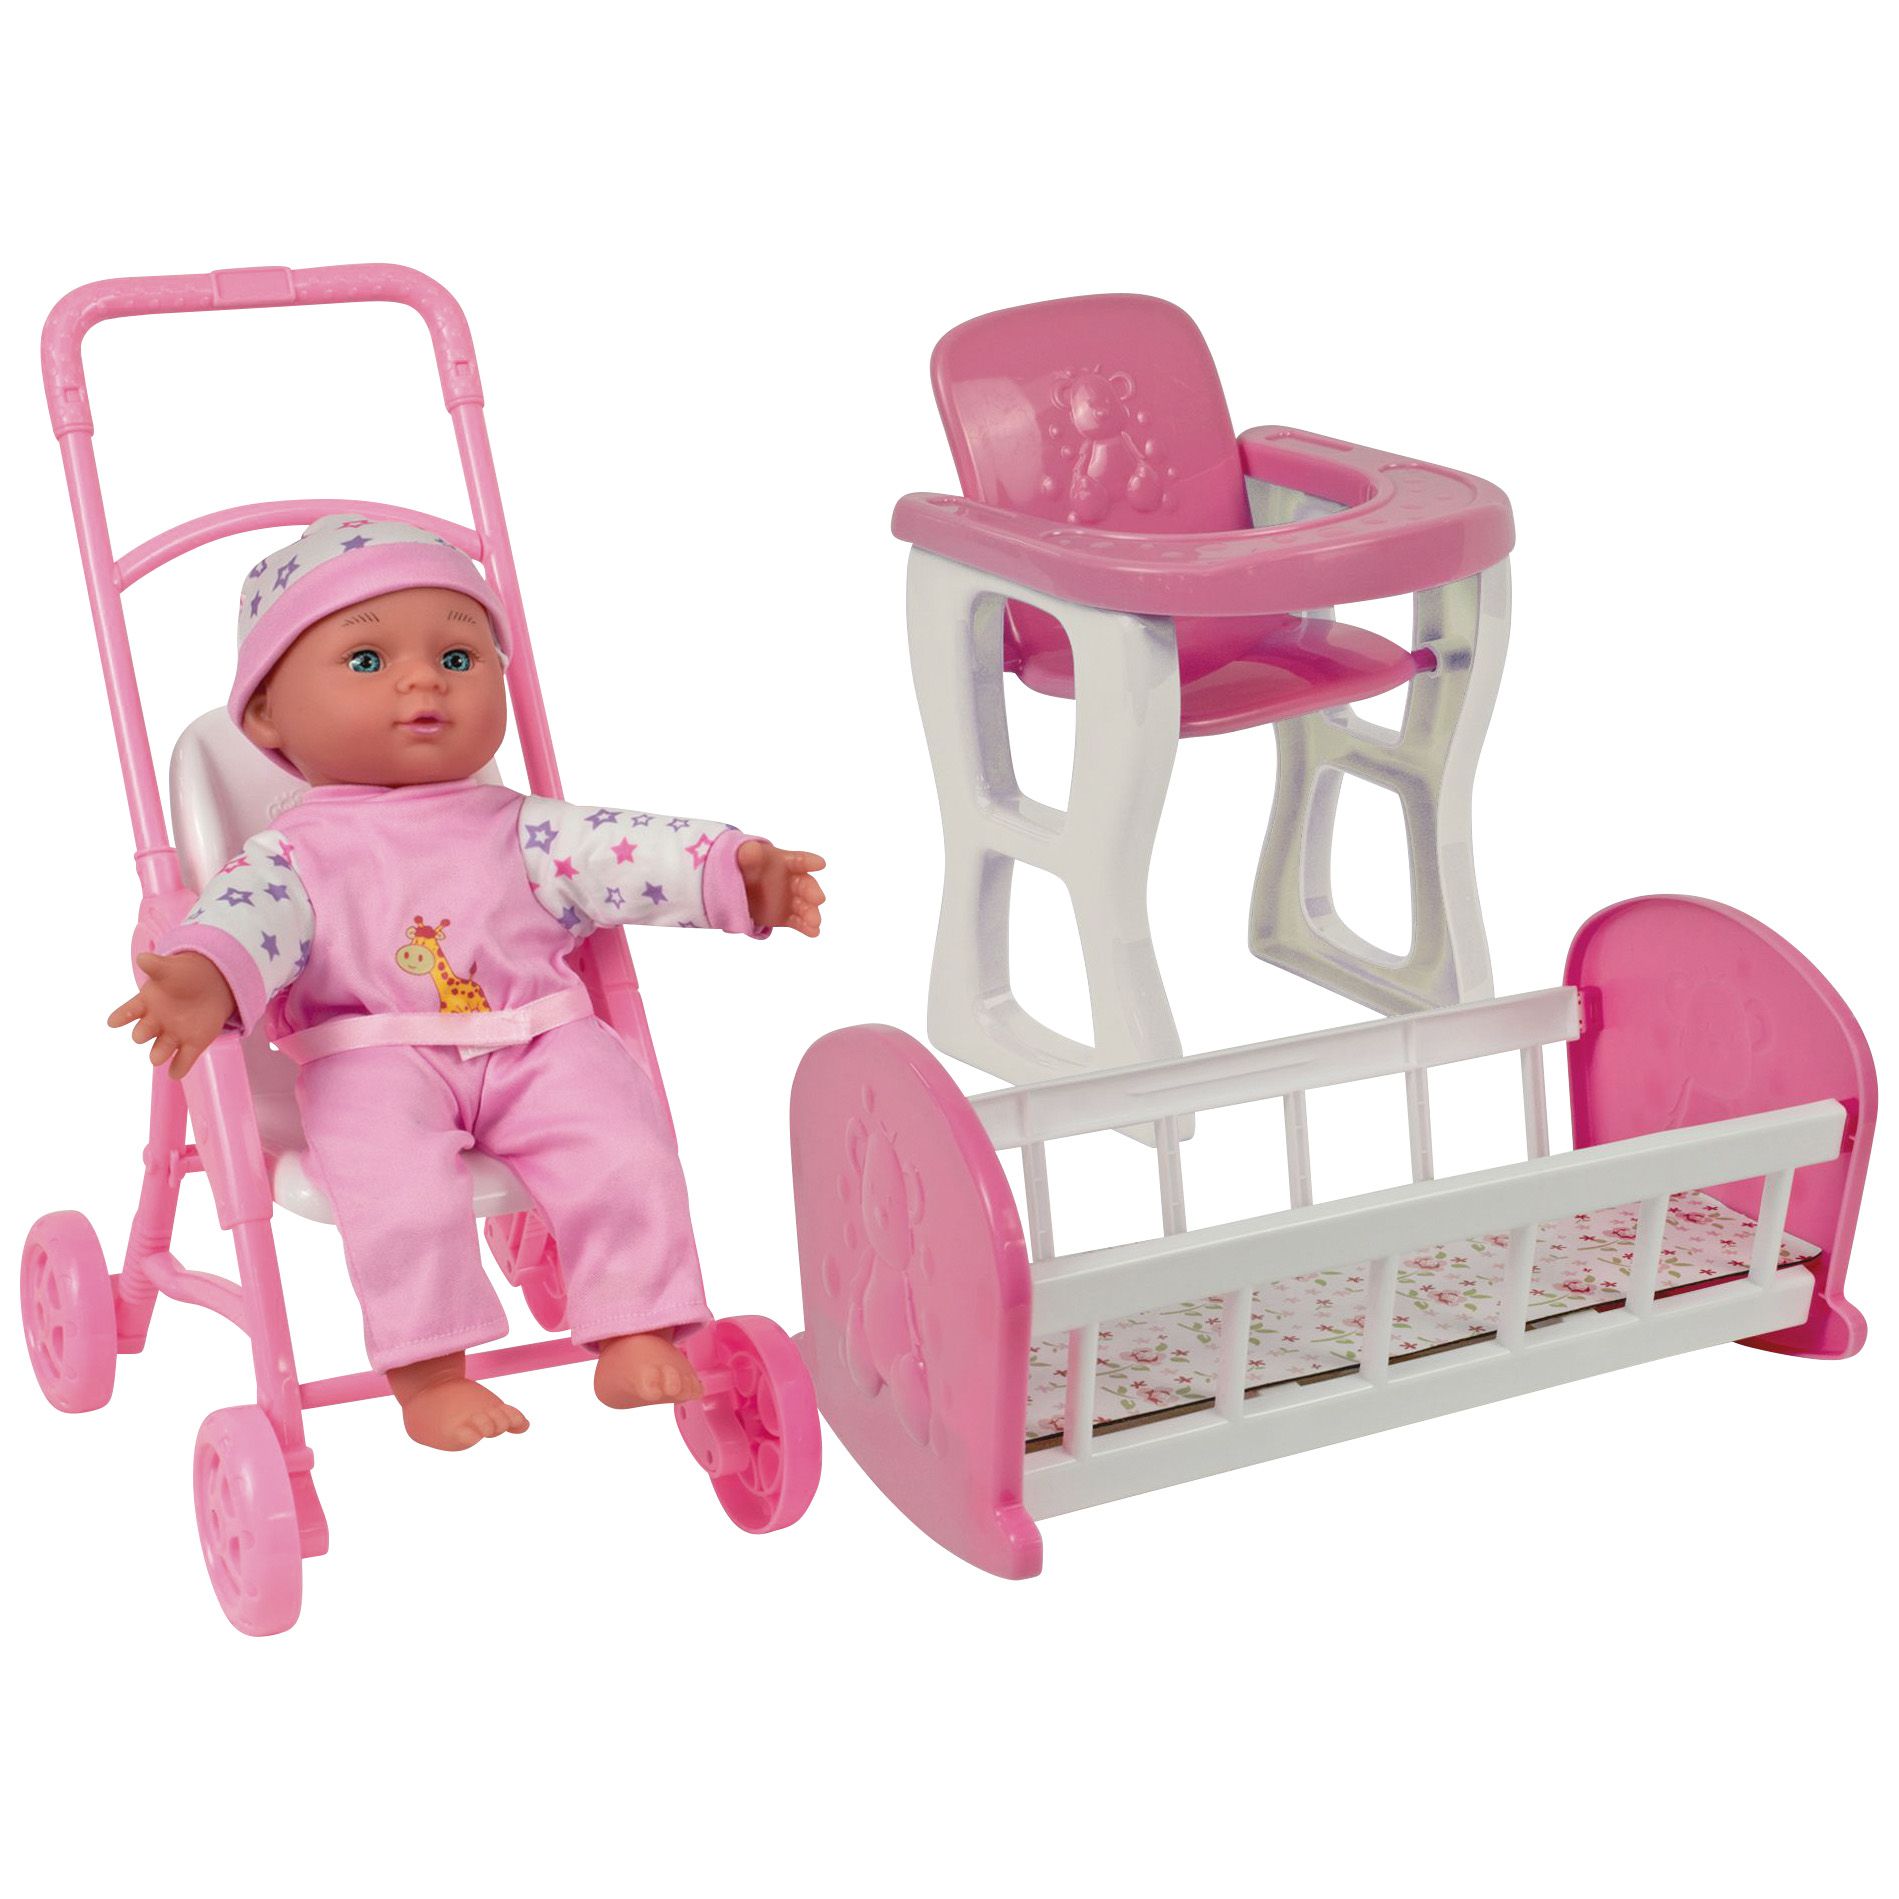 All-in-One Baby Doll Set